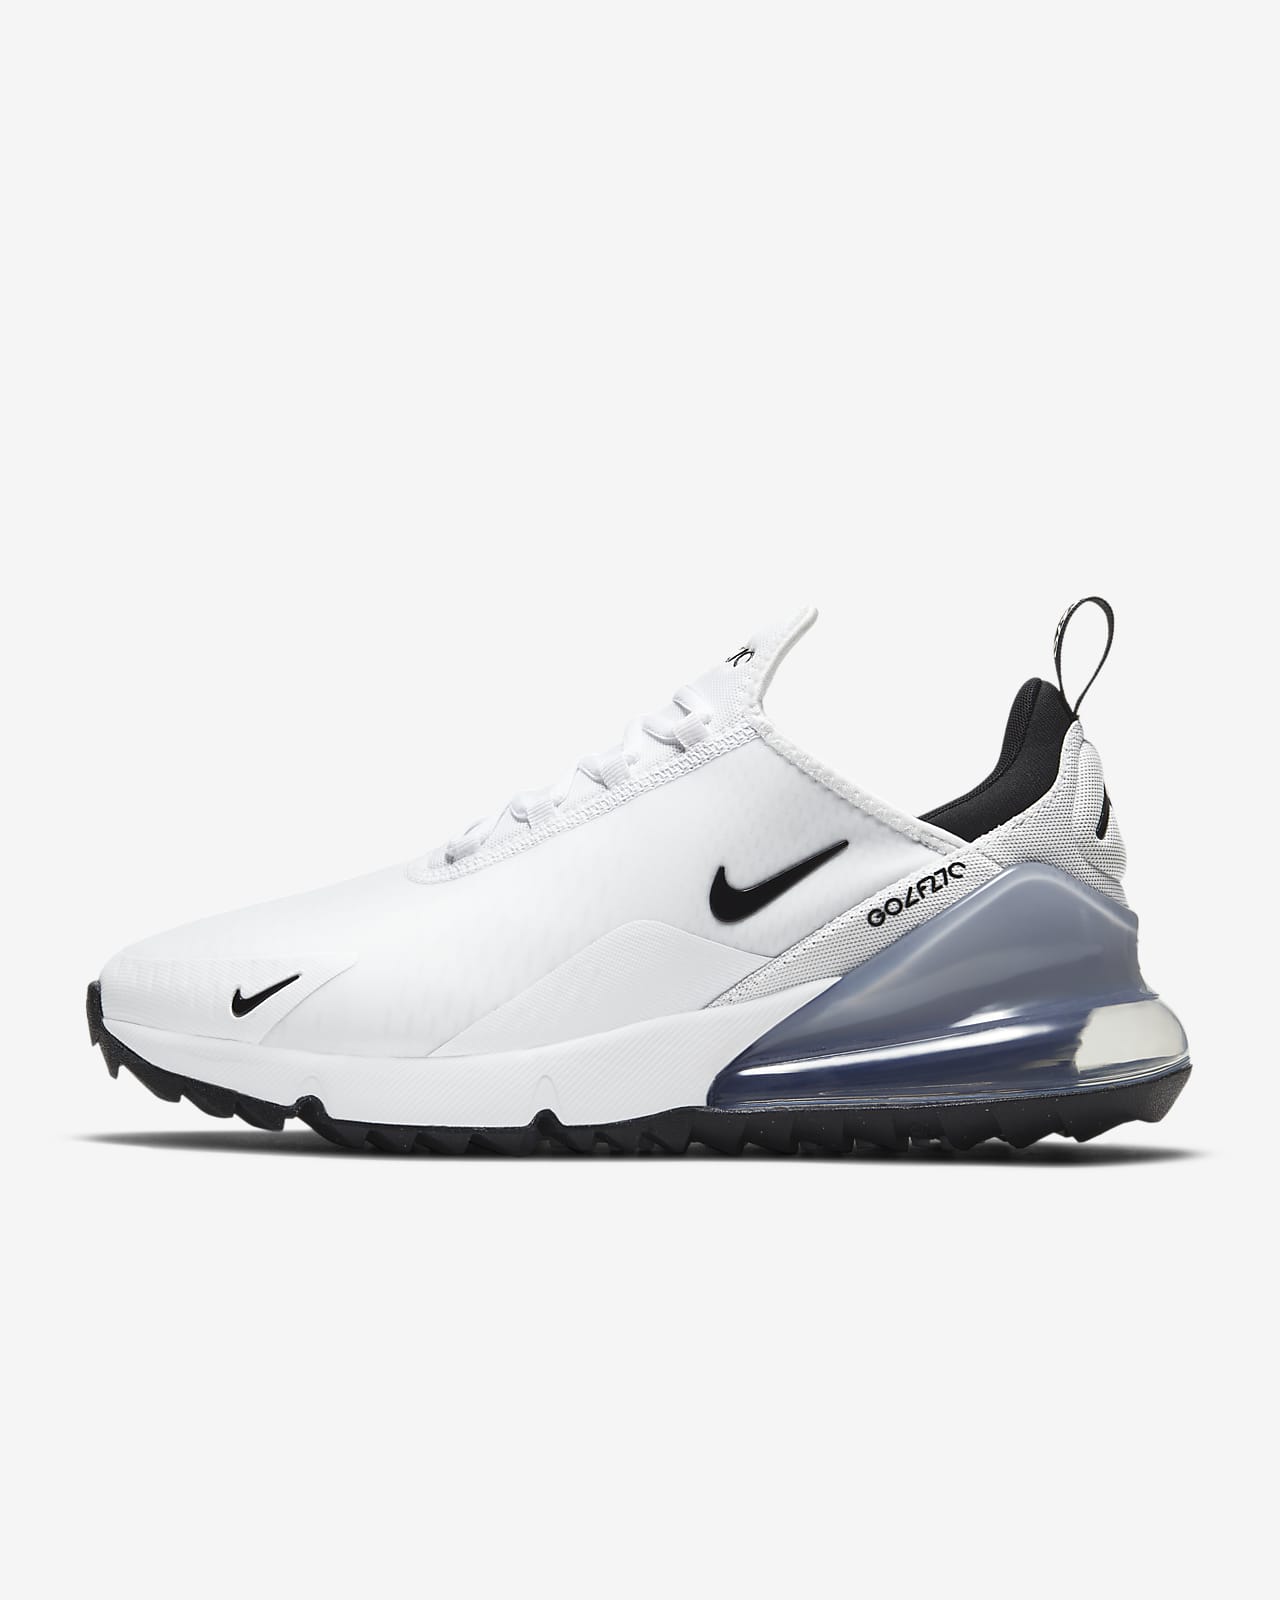 Revival Change clothes Controversial Nike Air Max 270 G Golf Shoe. Nike.com